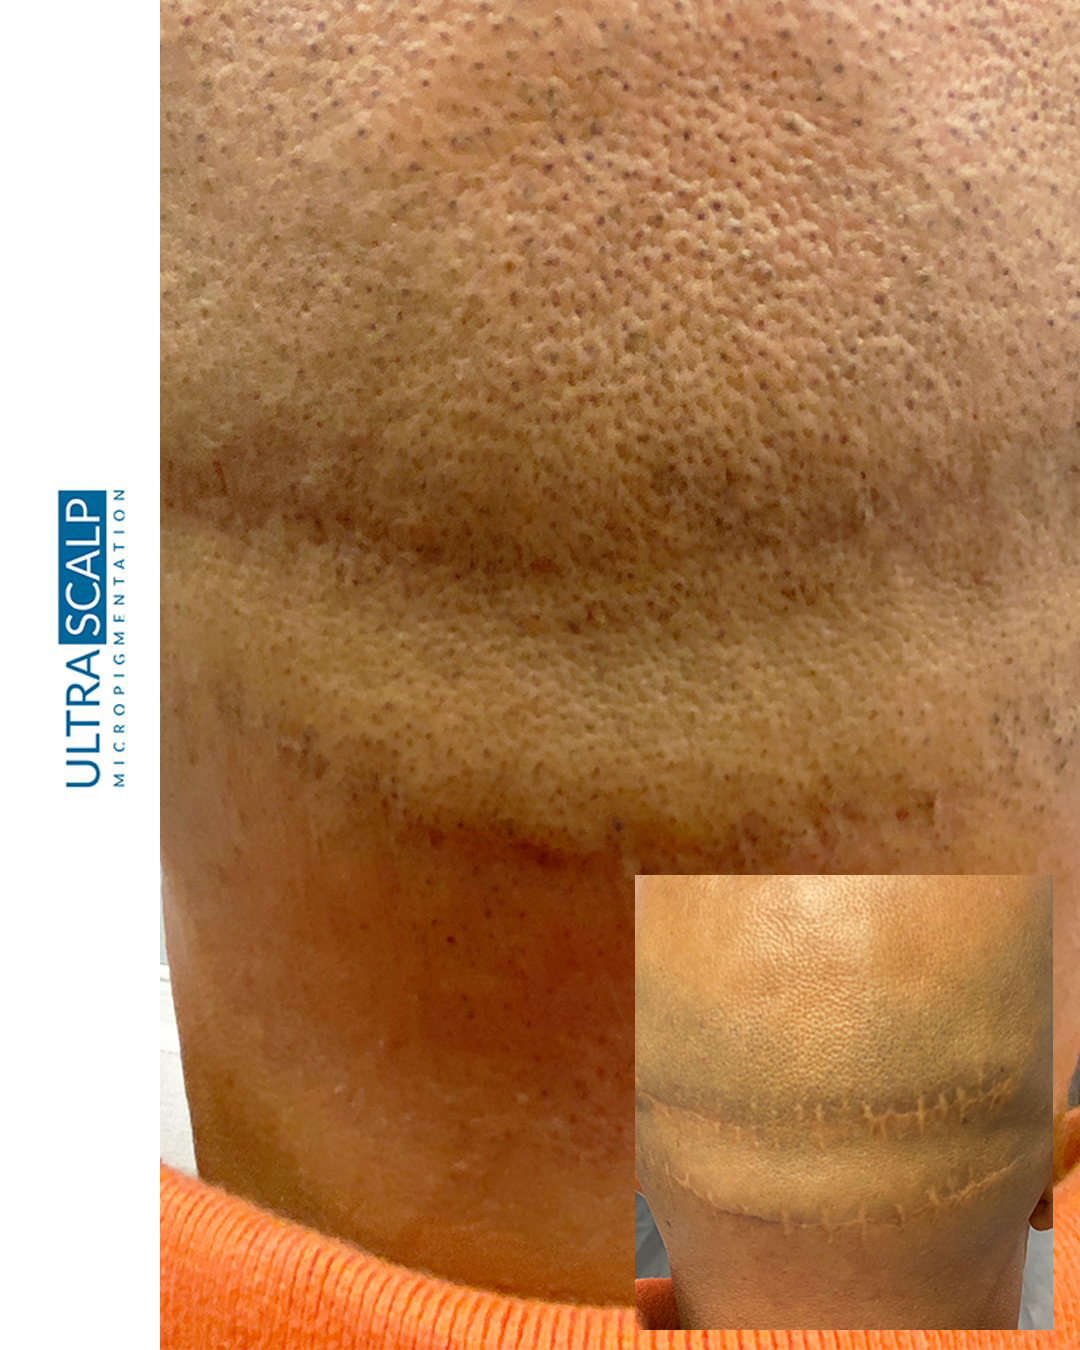 Hair Transplant Scar Cover Up 1